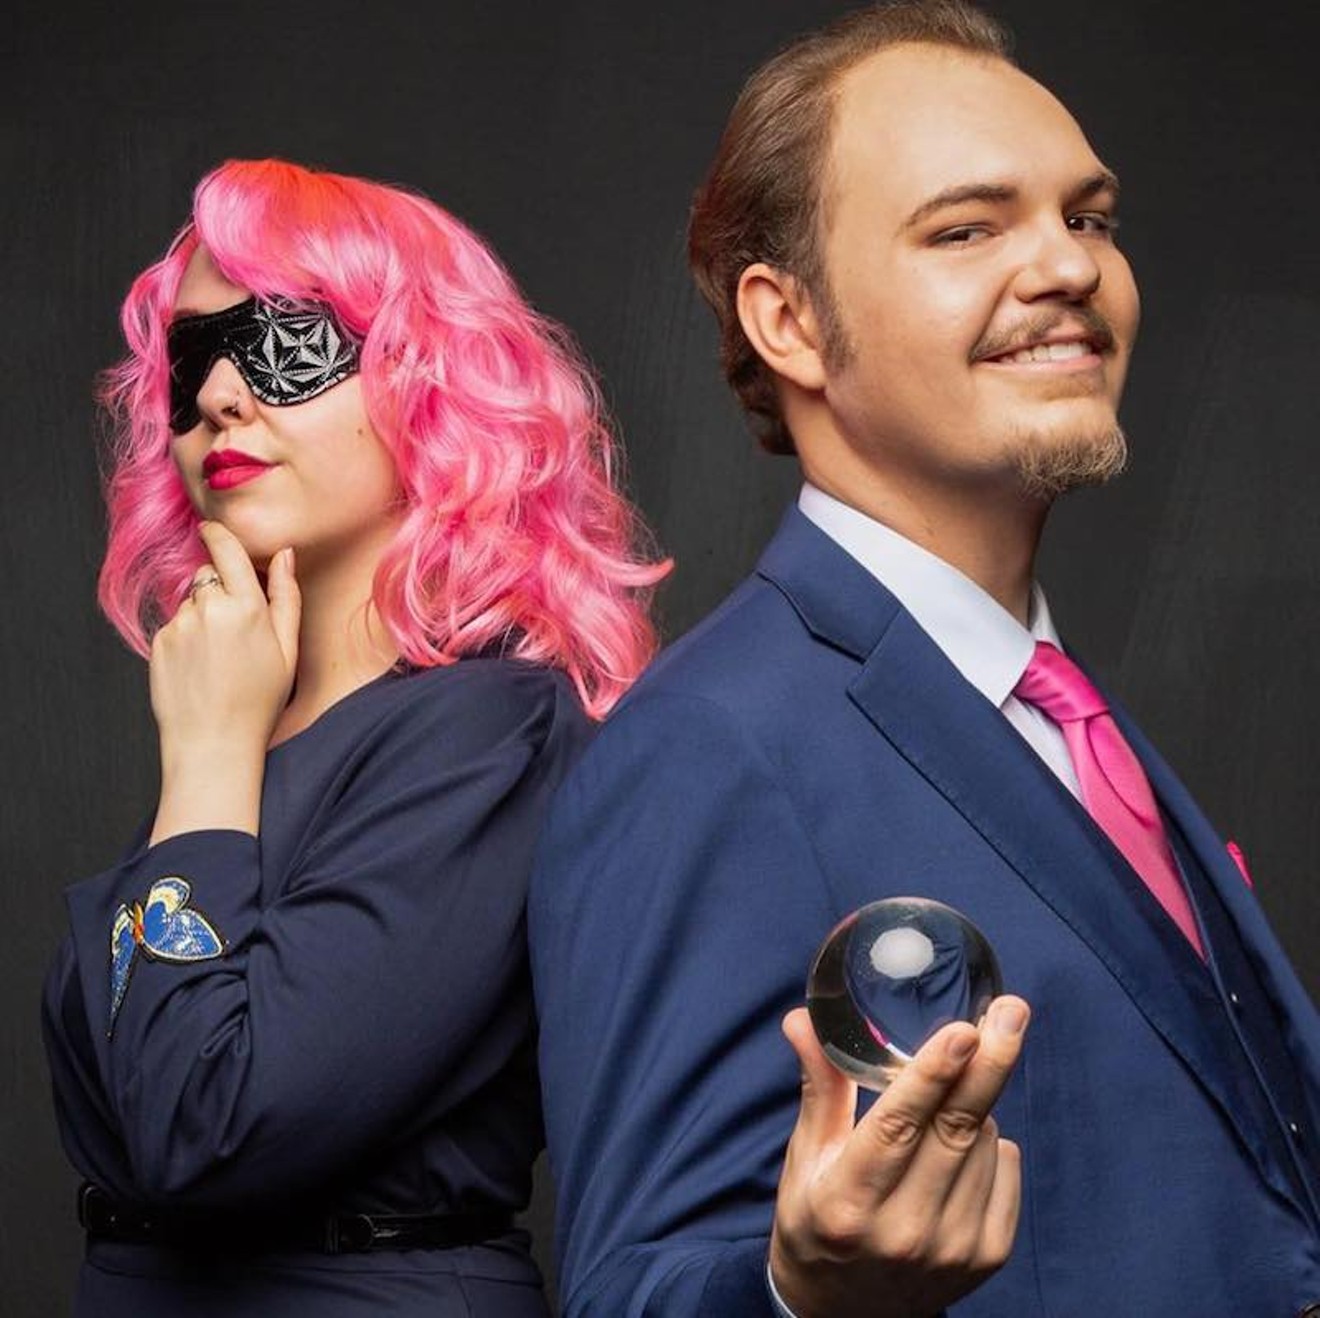 Kick off the weekend with Anthem and Aria's Magic Show, tonight at Syntax Physic Opera.